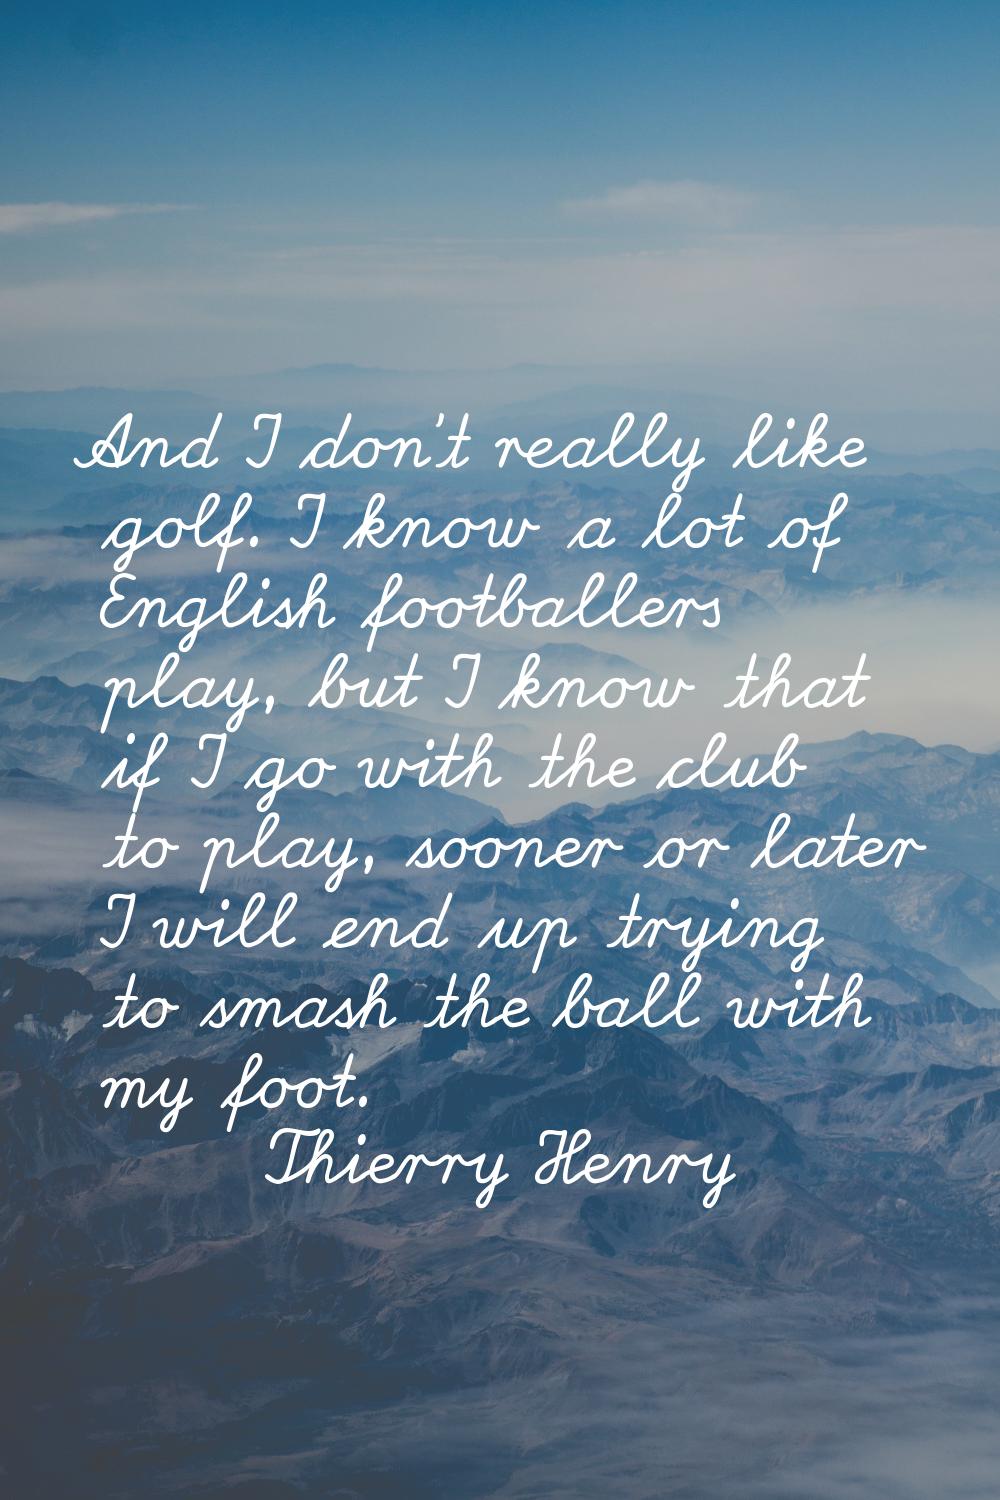 And I don't really like golf. I know a lot of English footballers play, but I know that if I go wit